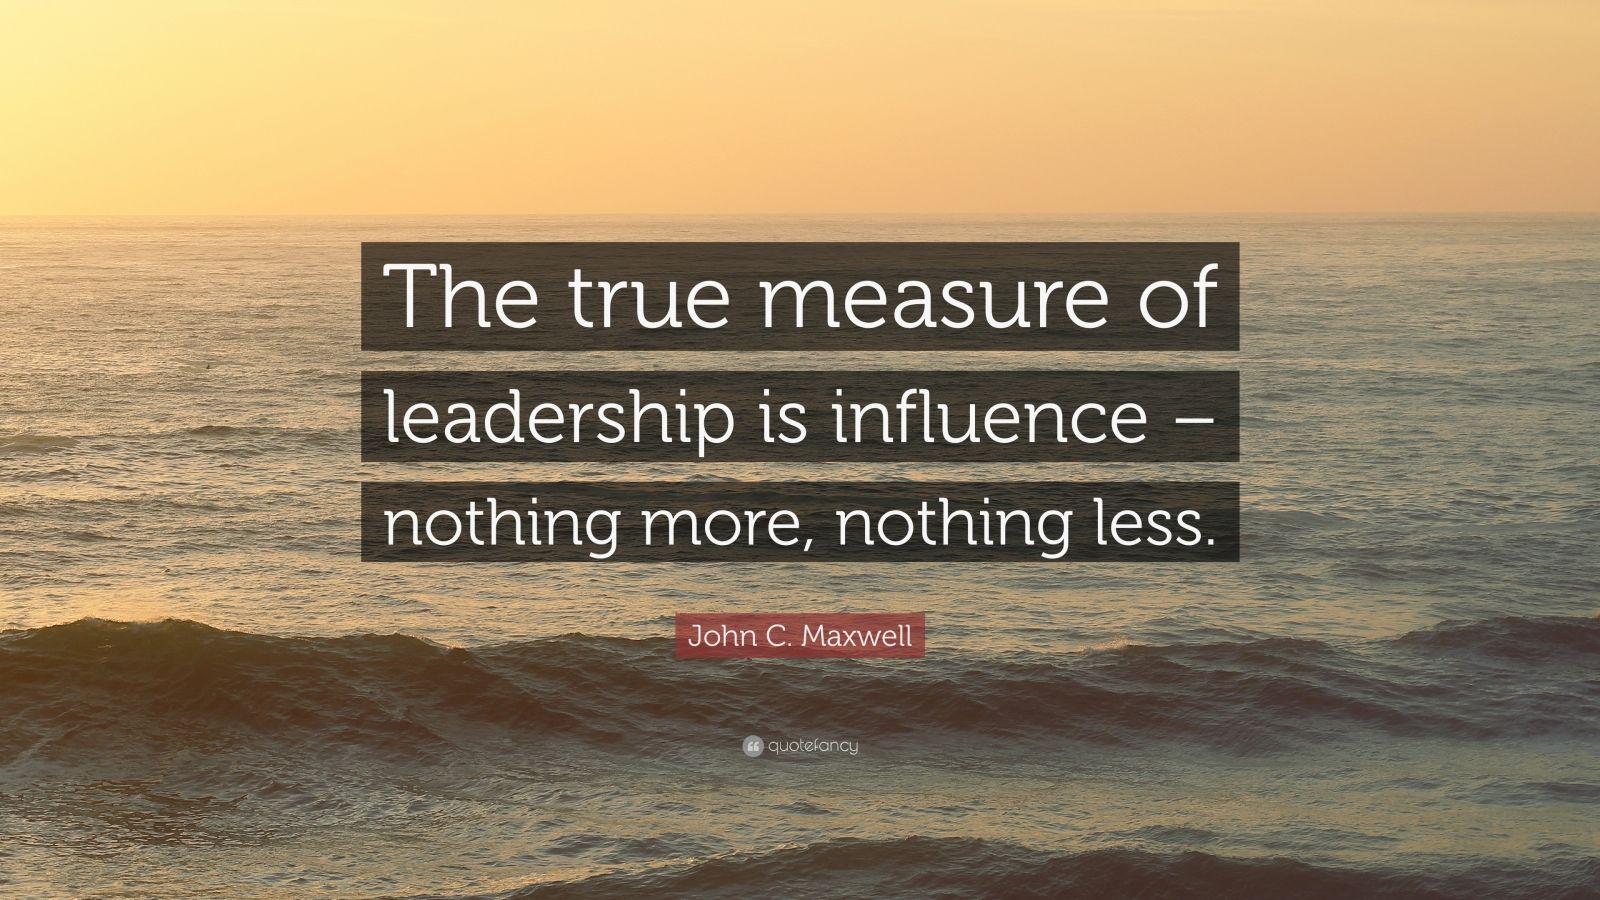 4686908 John C Maxwell Quote The true measure of leadership is influence